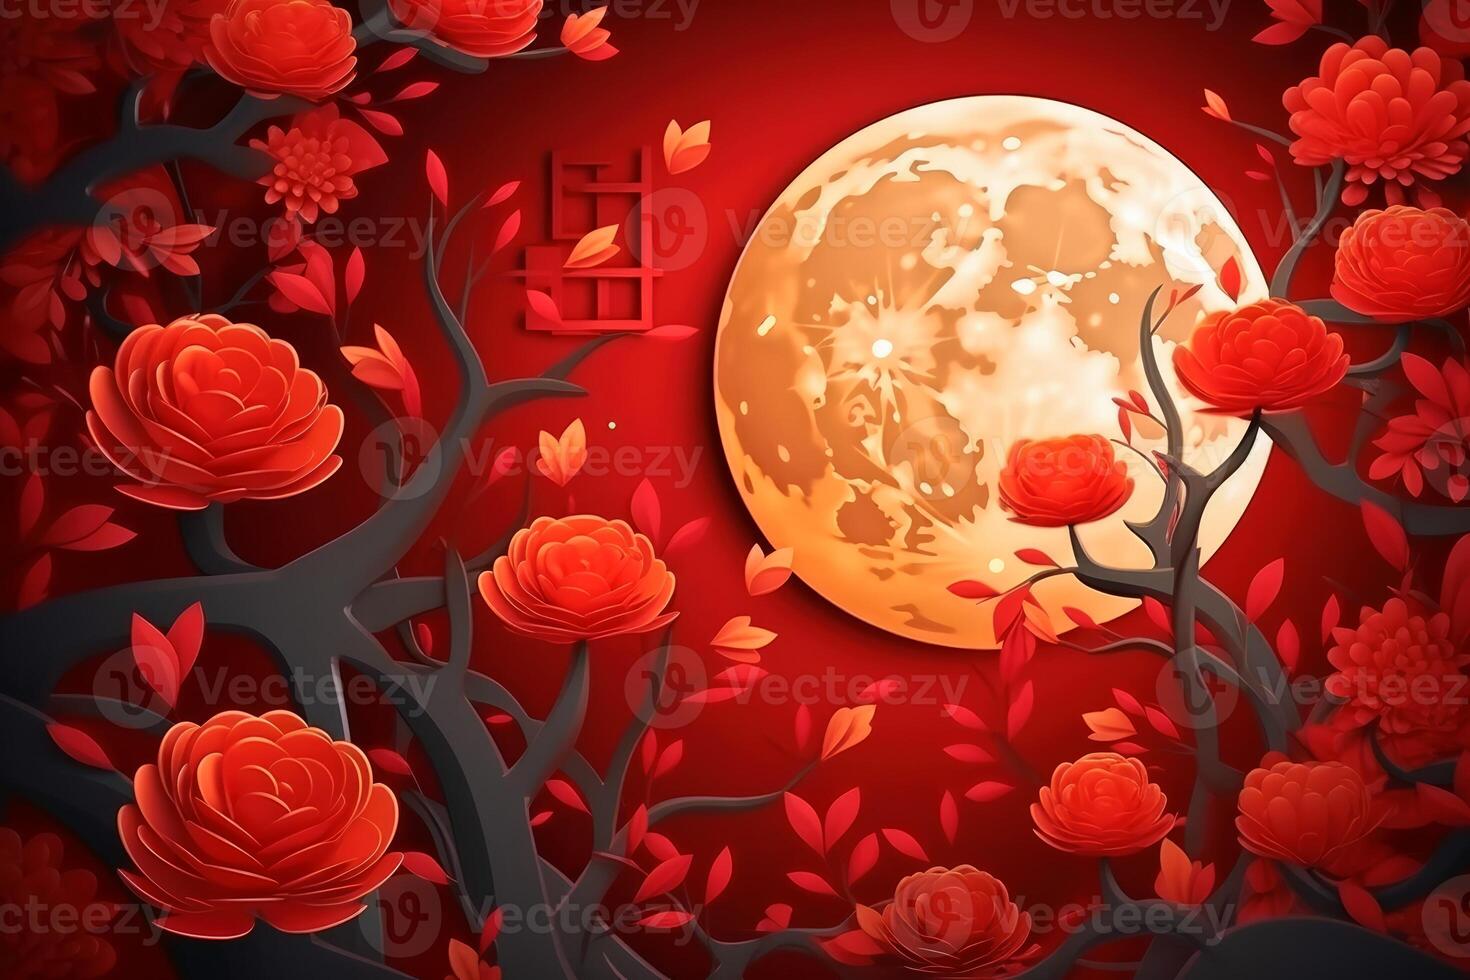 Chineese moon festival concept background created with technology. photo